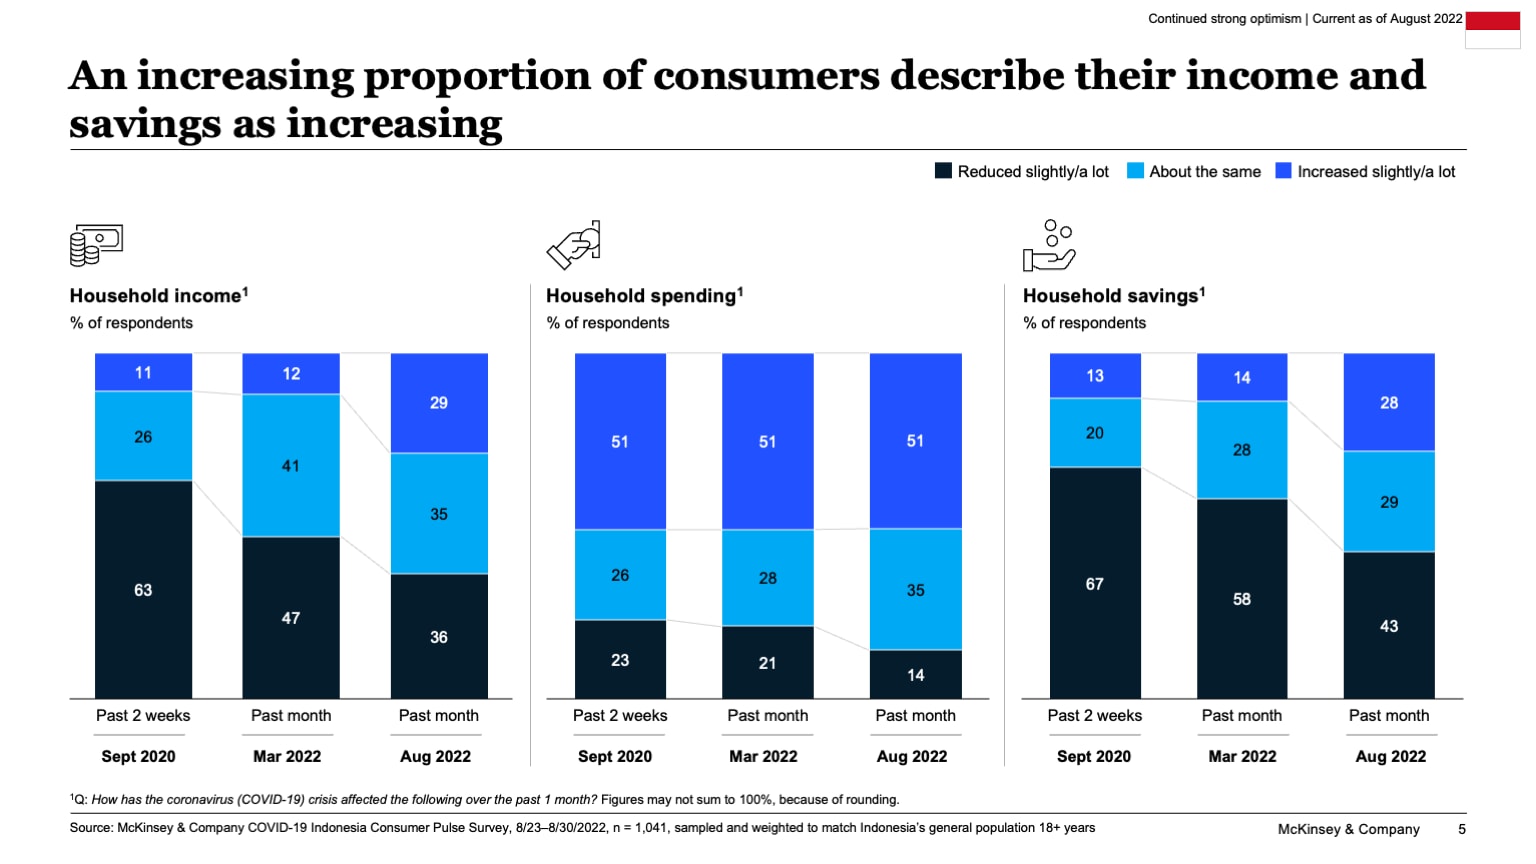 An increasing proportion of consumers describe their income and savings as increasing